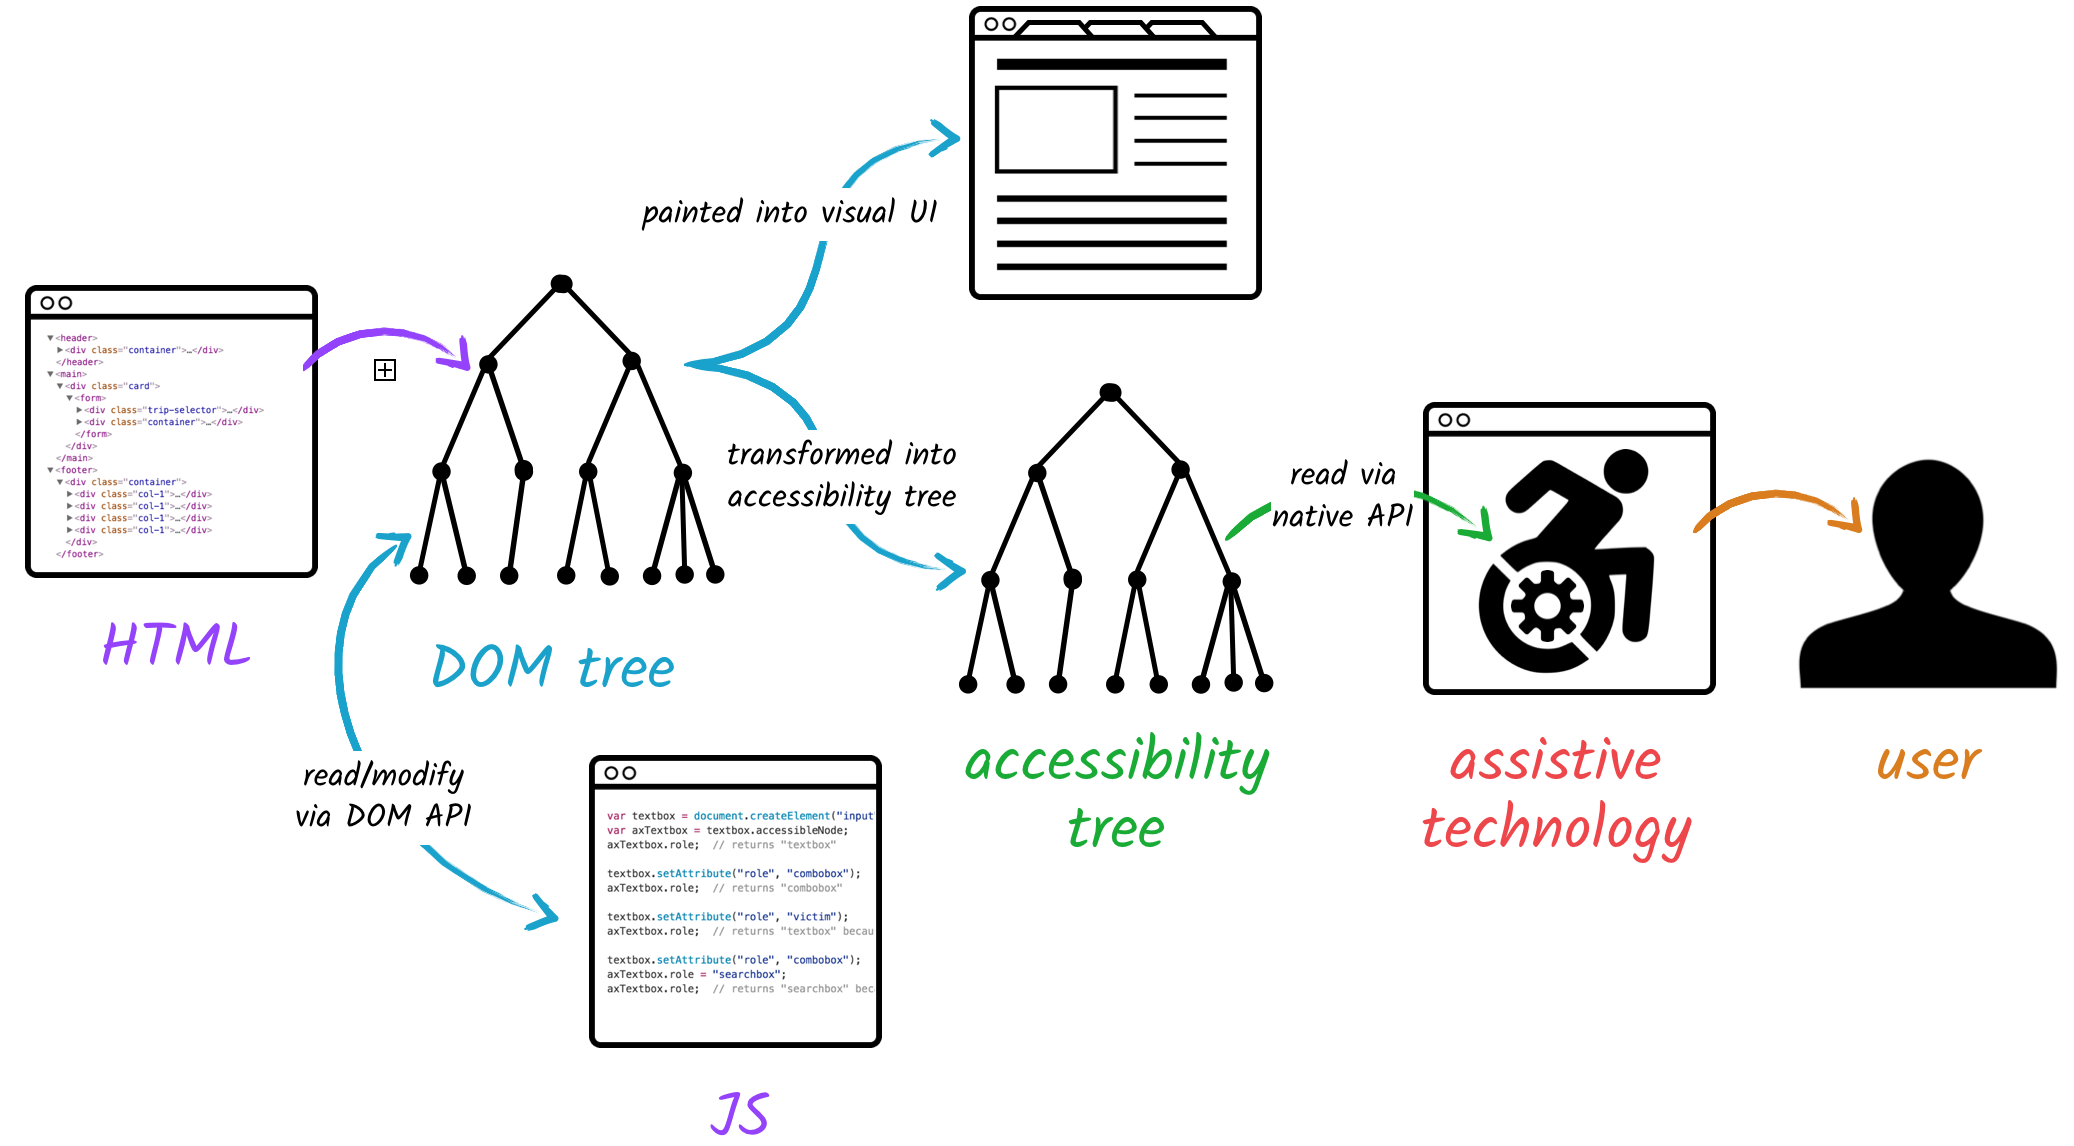 DOM tree, accessibility tree and platform accessibility APIs